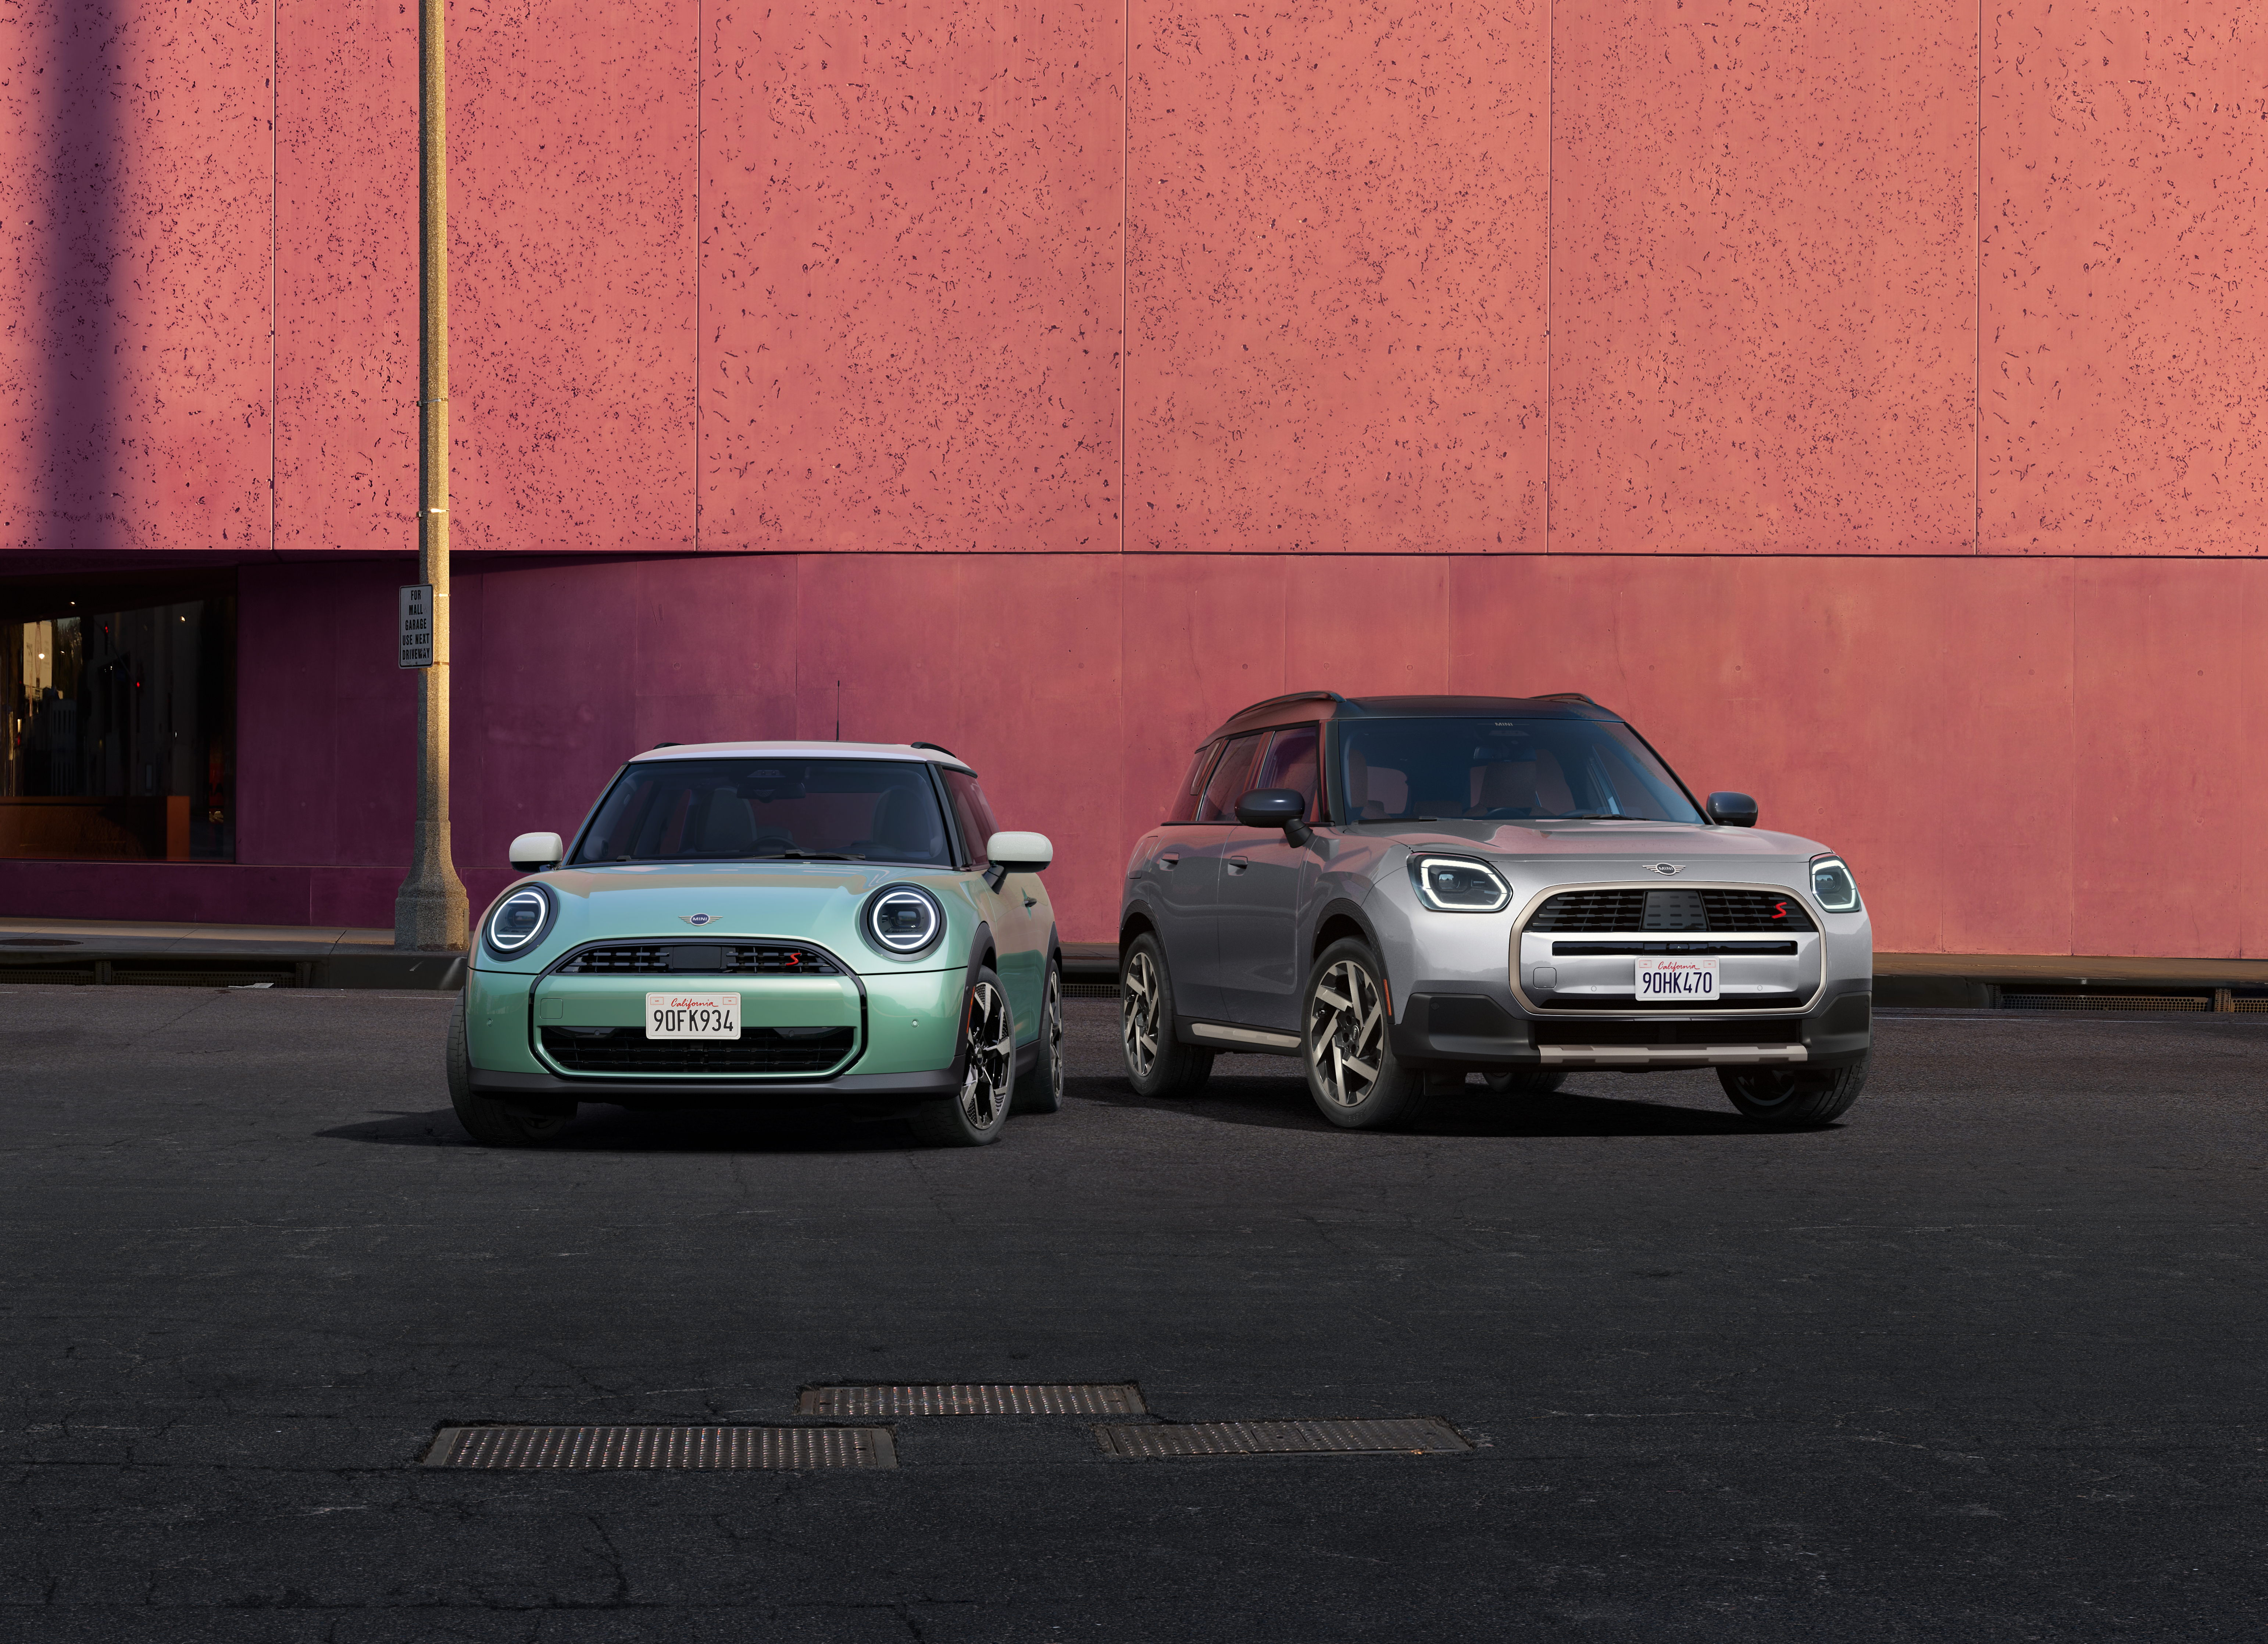 Front-view of the 2025 MINI Cooper S 2 Door in Ocean Wave Green and 2025 MINI Countryman S ALL4 in Melting Silver III parked side by side in front of a salmon-colored concrete building.